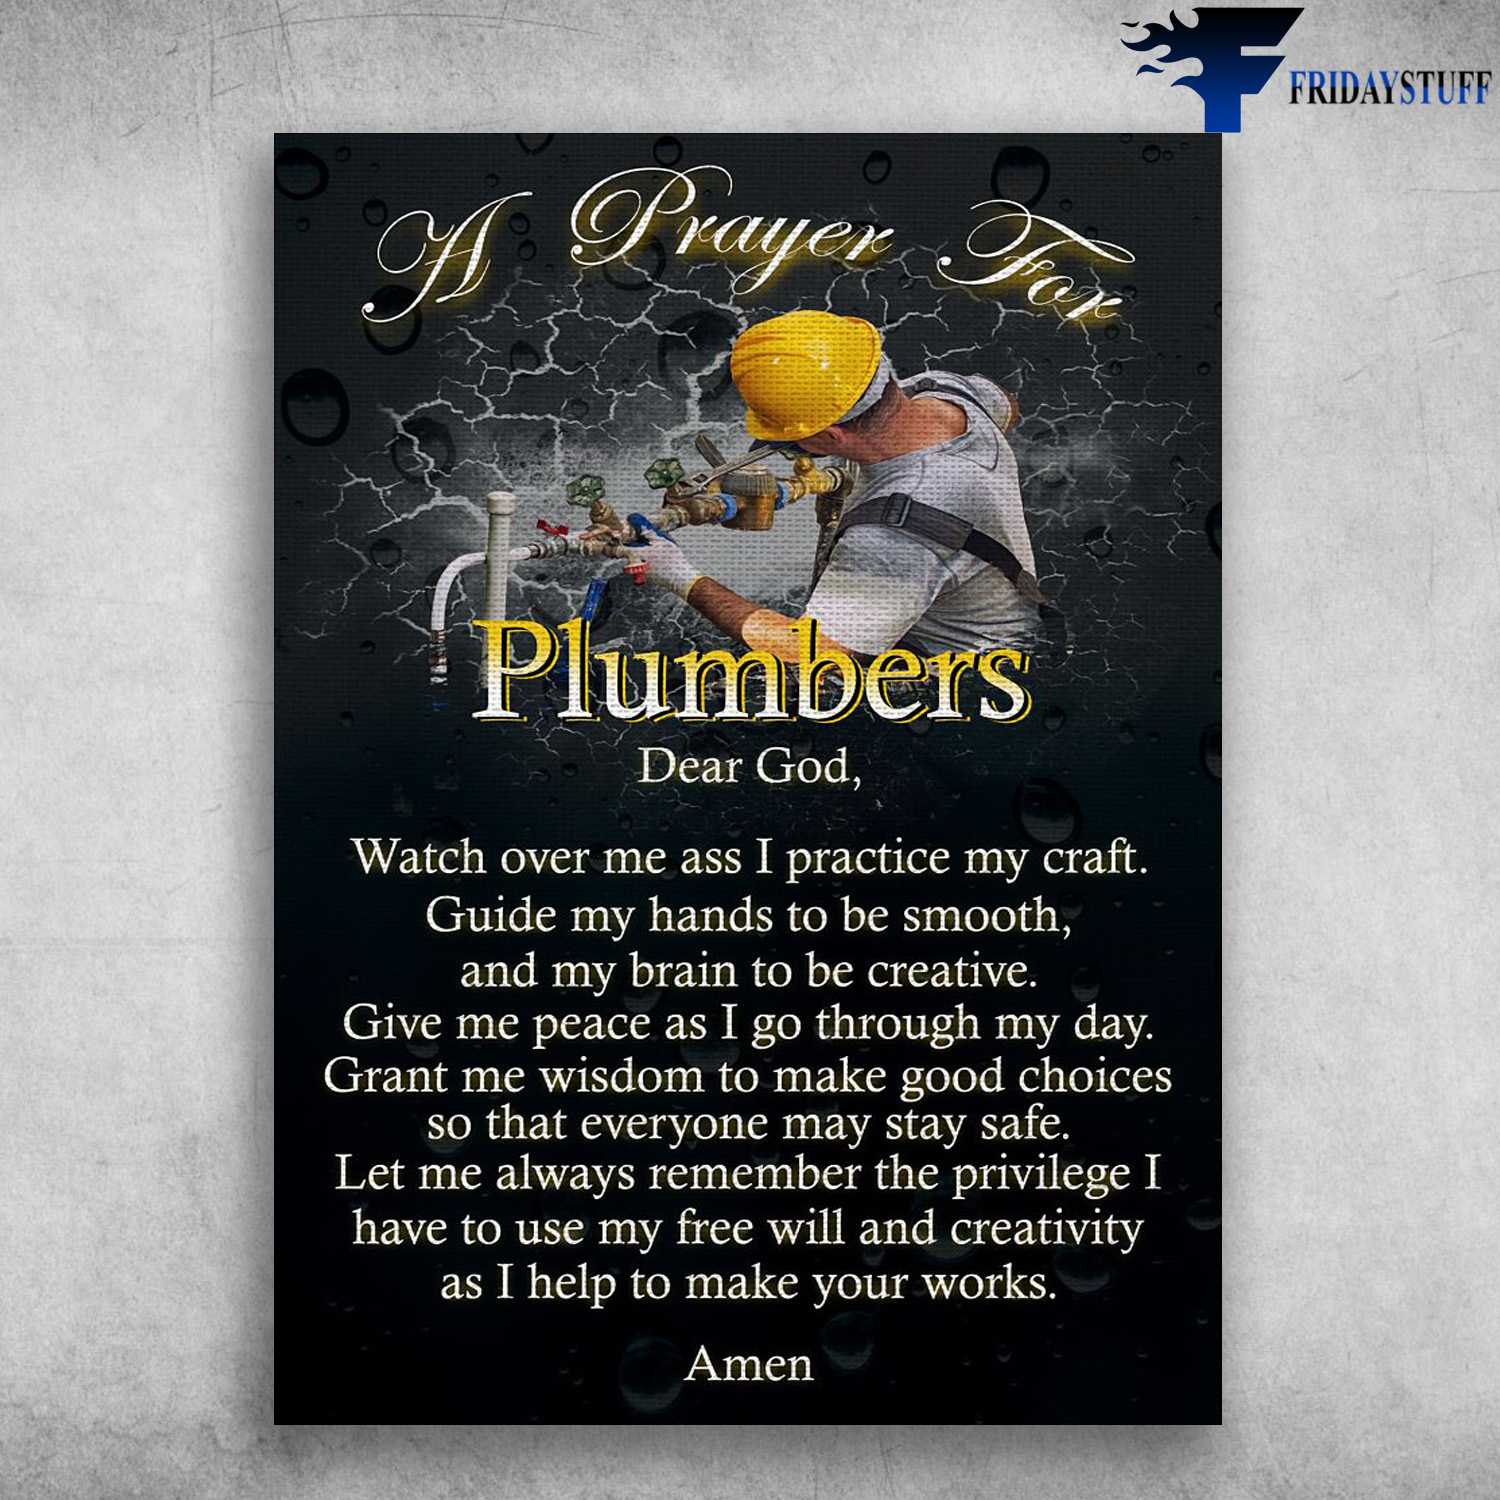 Plumber Poster, A Prayer For Plumbers - Dear God, Watch Over Me Ass I Practive My Craft, Guide My Hands To Be Smooth, And My Brain To Be Creative, Give Me A Peace As I Go Through My Day